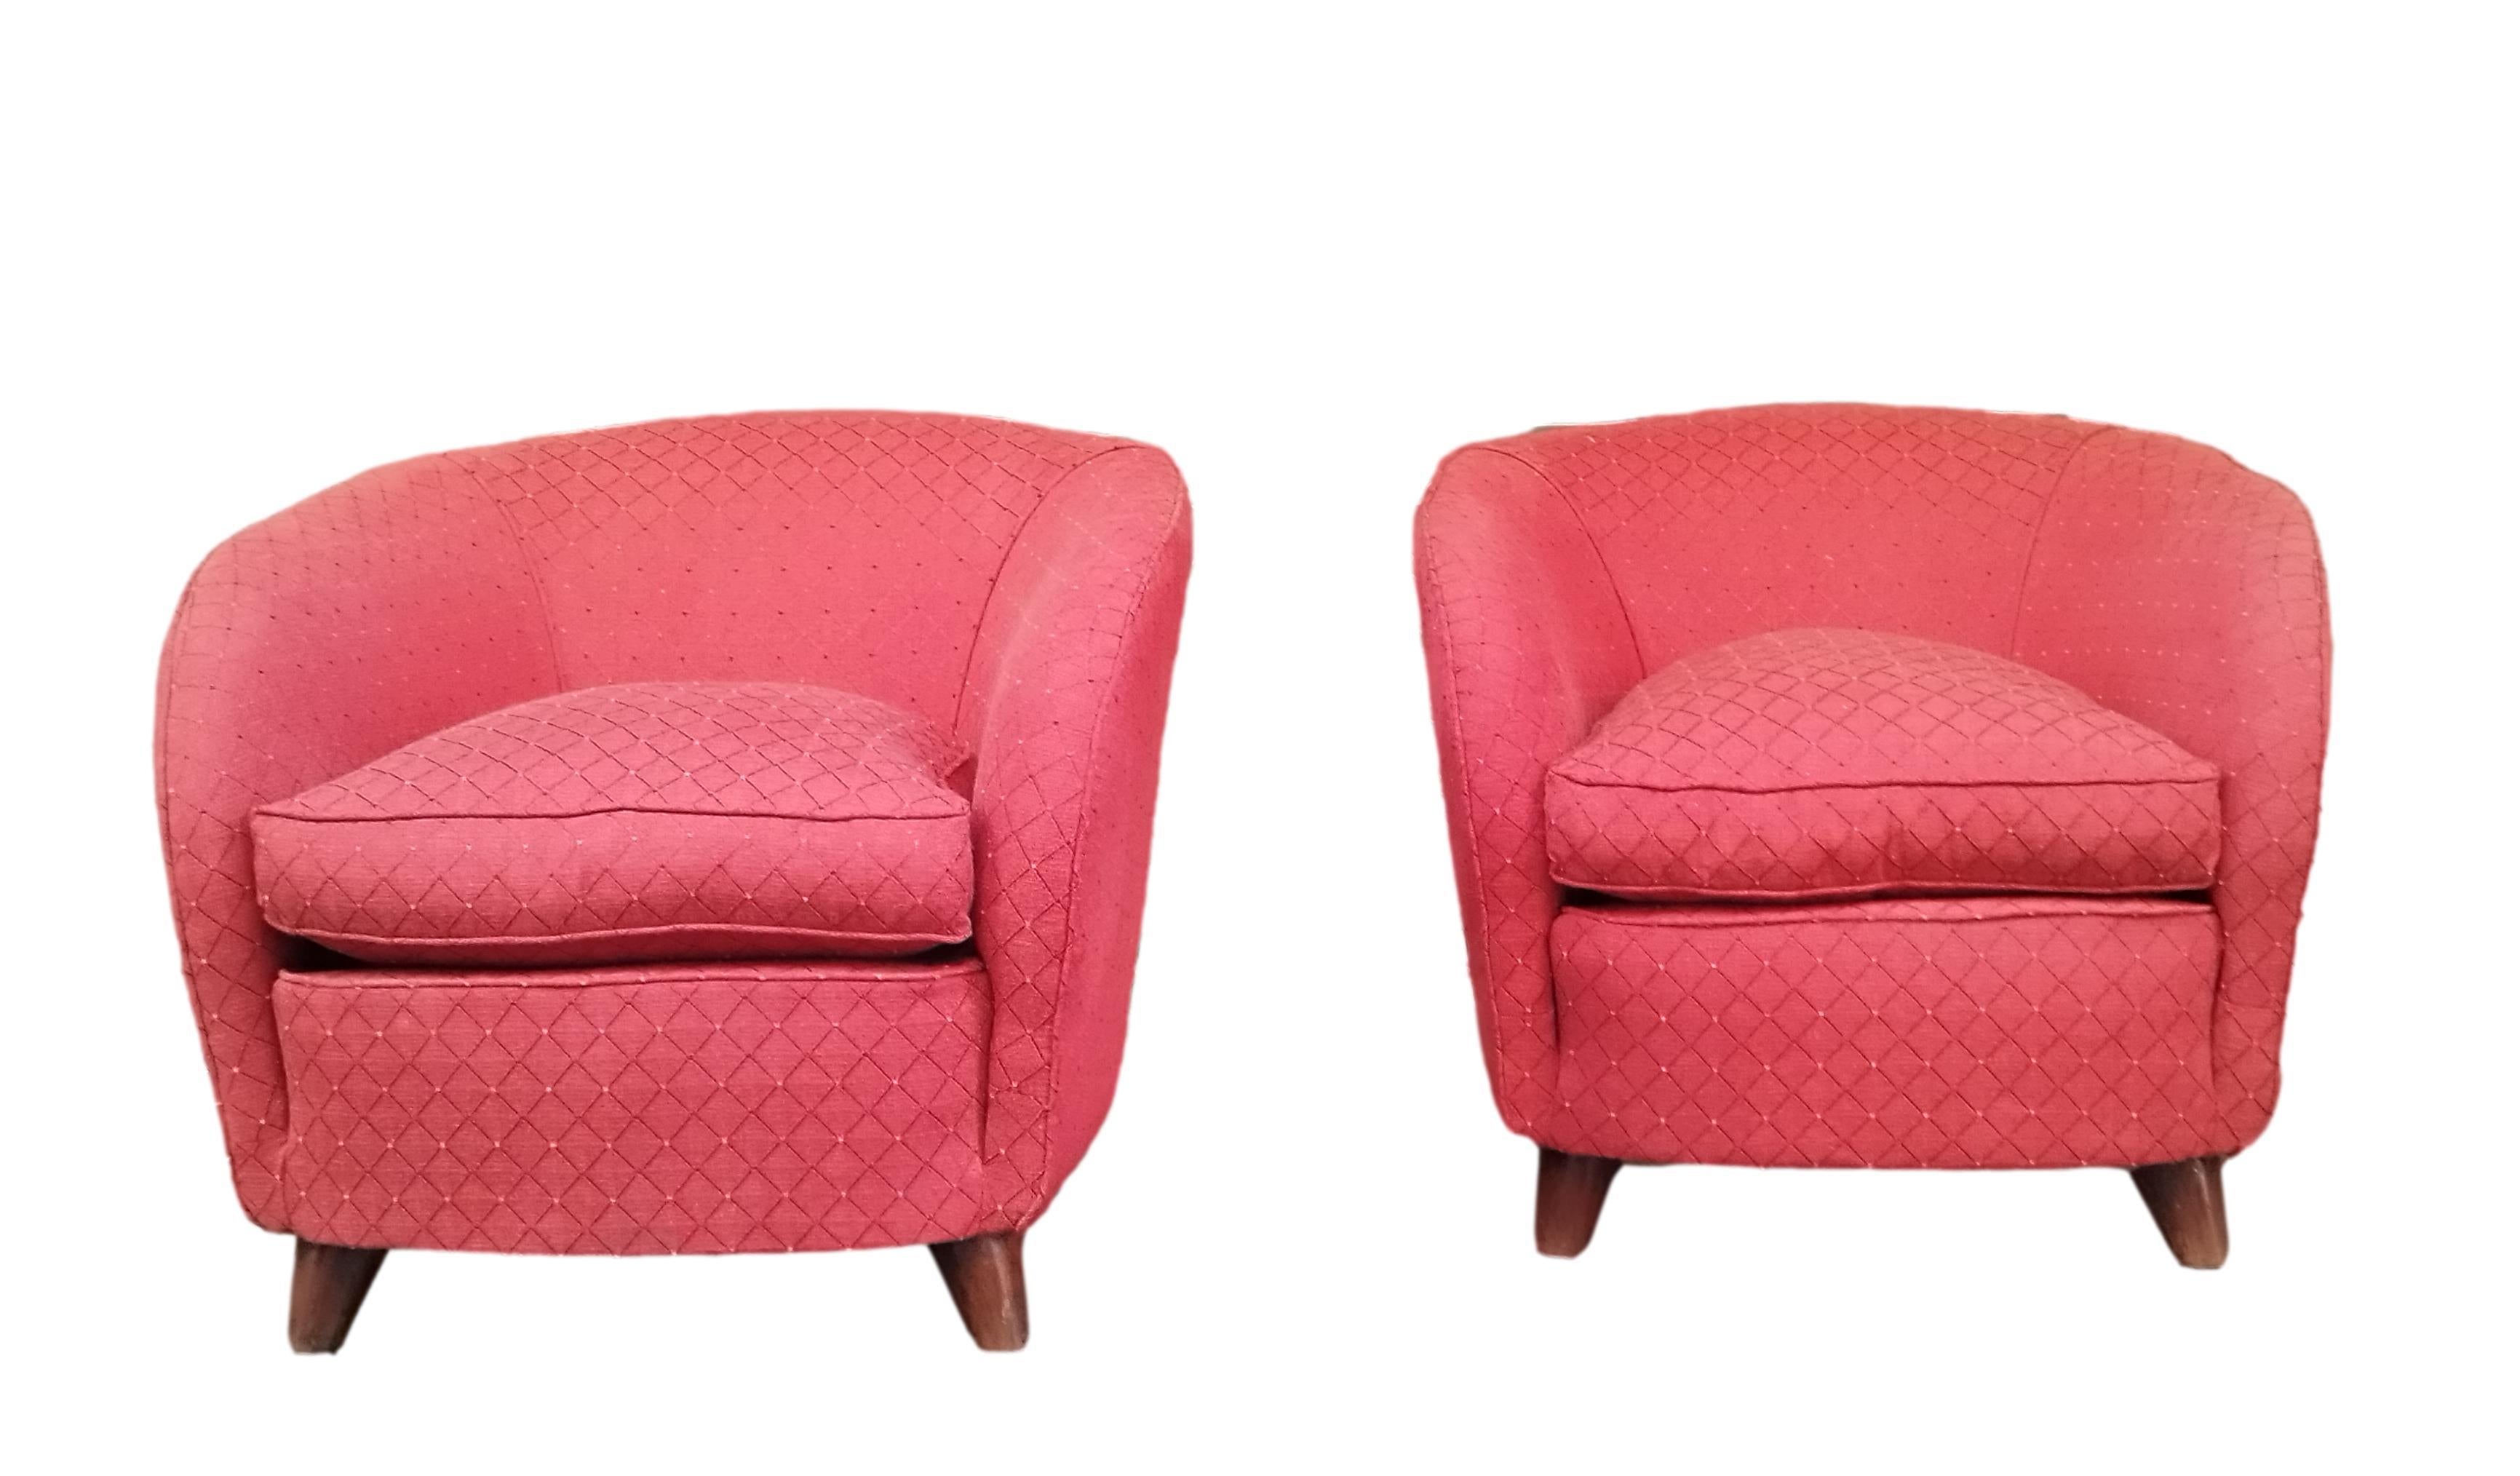 A beautiful pair of curved armchairs upholstered in a luxurious vintage fabric preserved from the 1950s. Made in the style of the renowned Italian designer Gio Ponti. A timeless classic design in these sculptural armchairs that match many interior